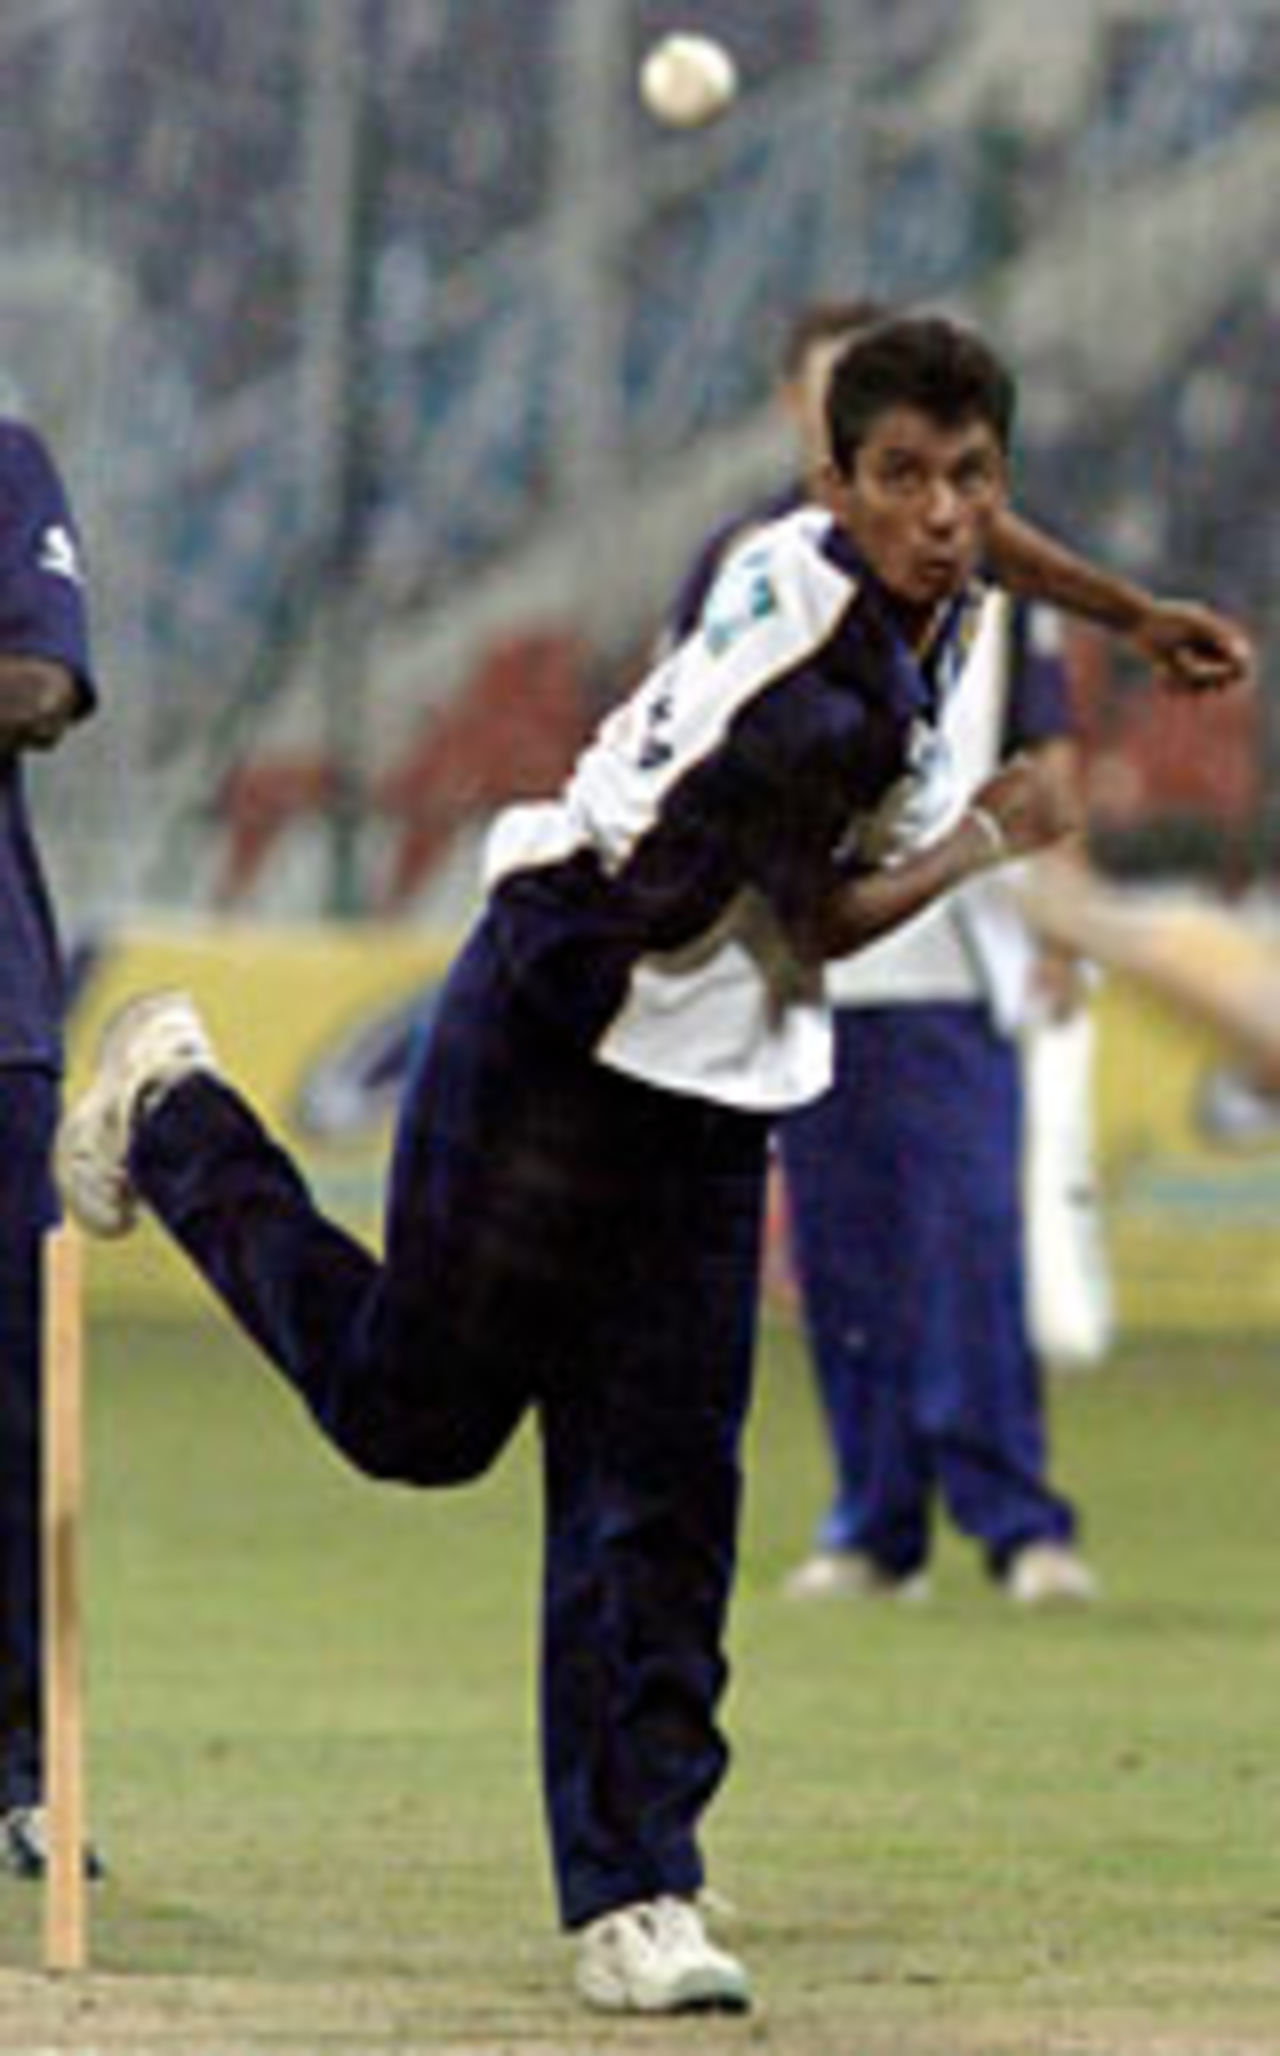 Upul Chandana grooving his action at a practise session, at the Gaddafi stadium in Lahore, October 12 2004